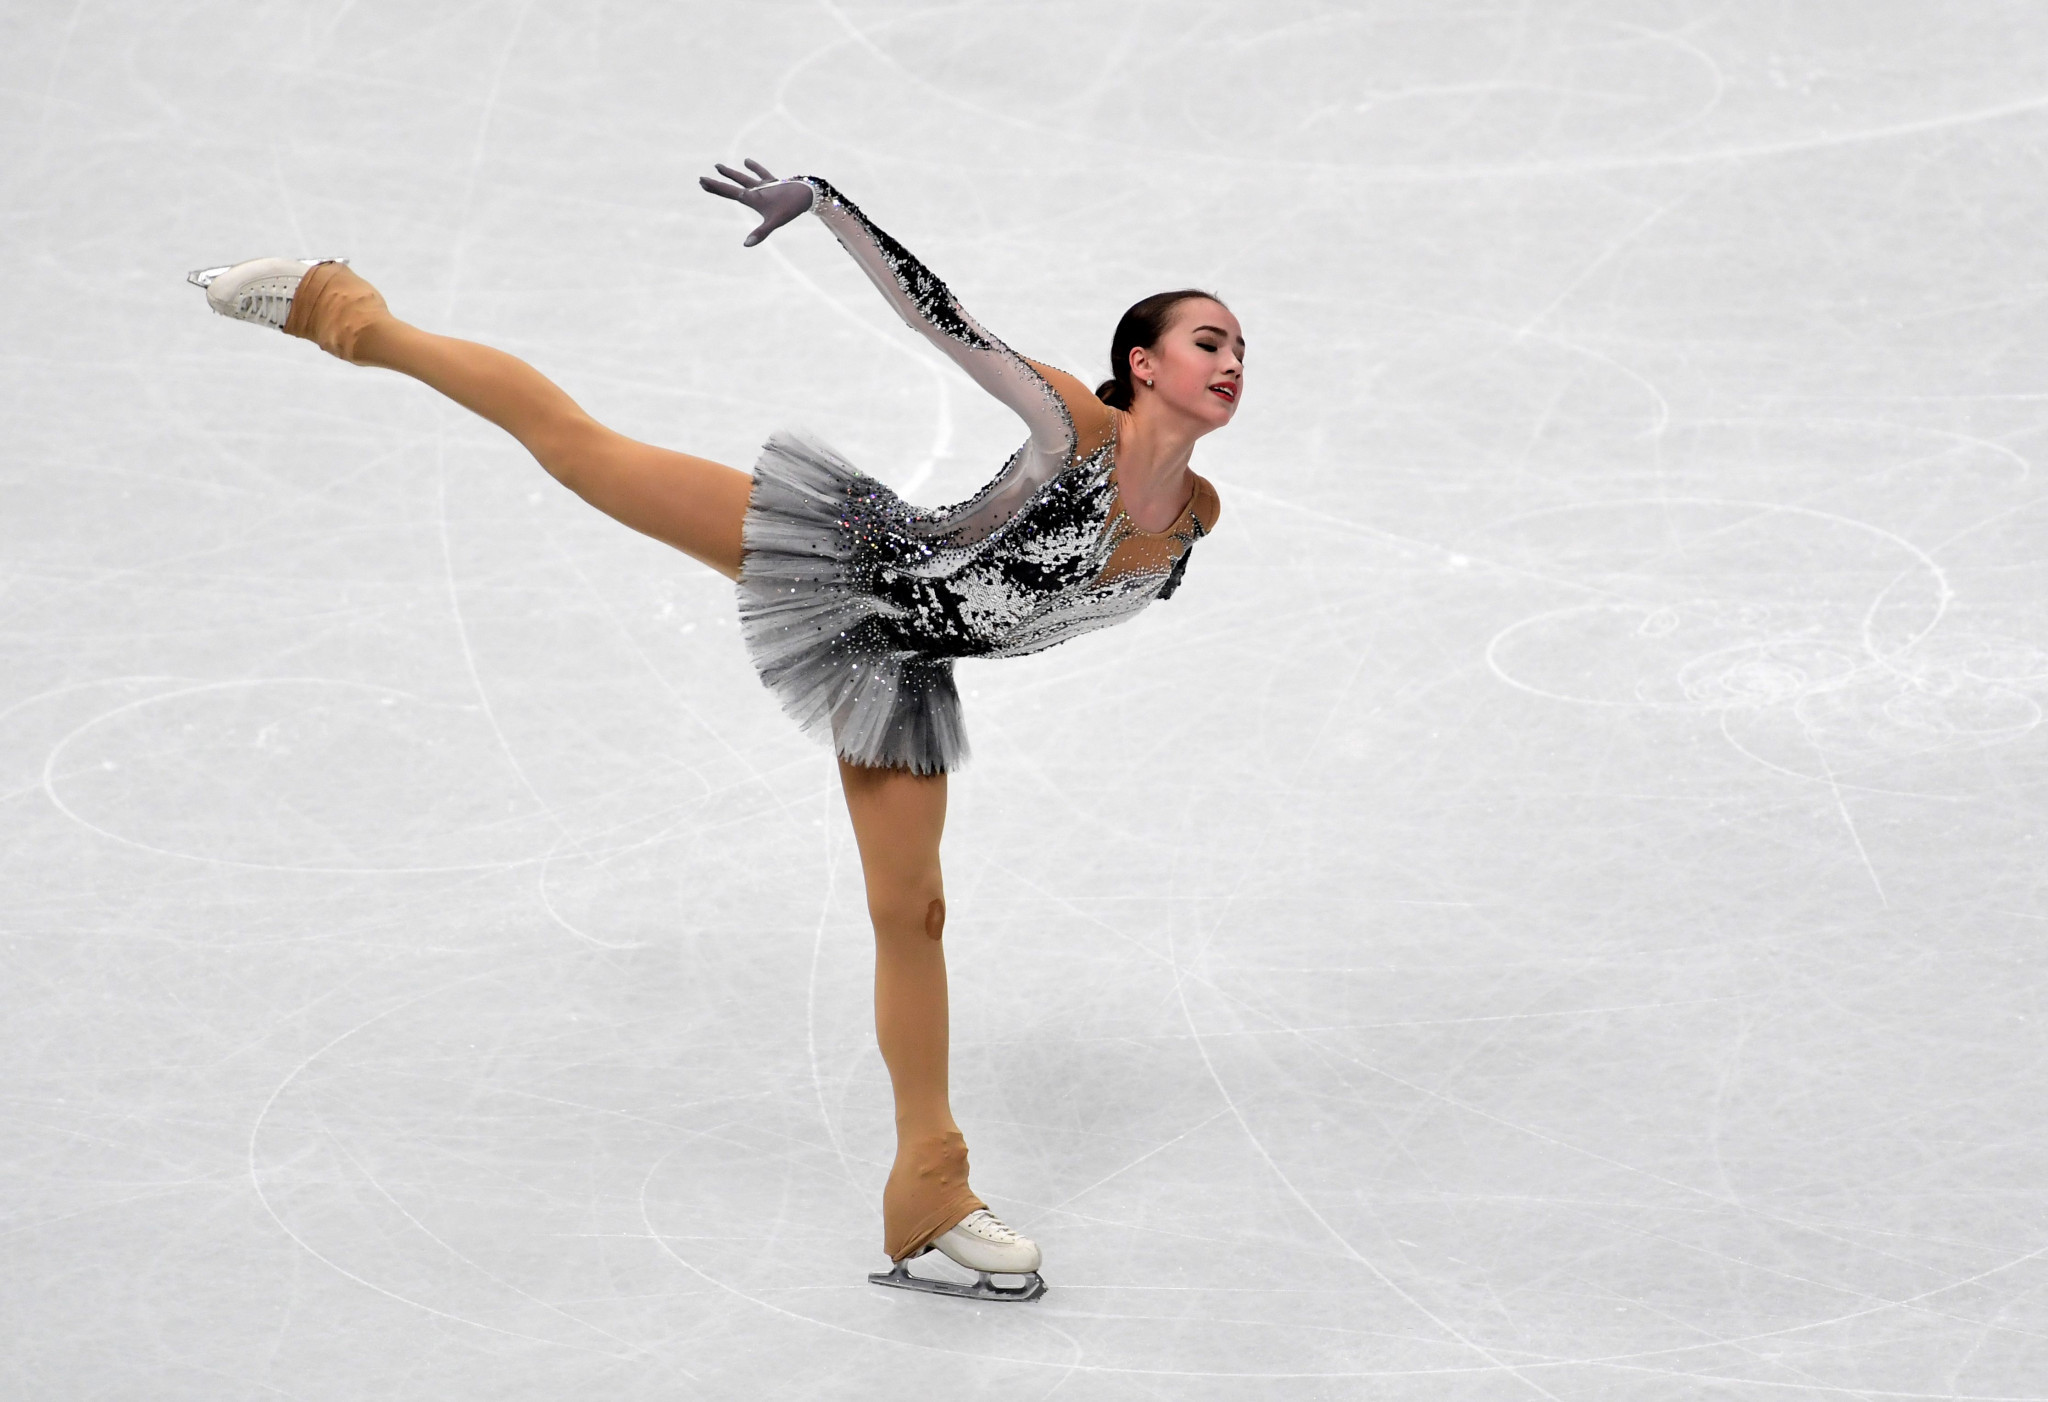 Alina Zagitova claimed she was using her World Championship disappointment as motivation ahead of her season ©Getty Images